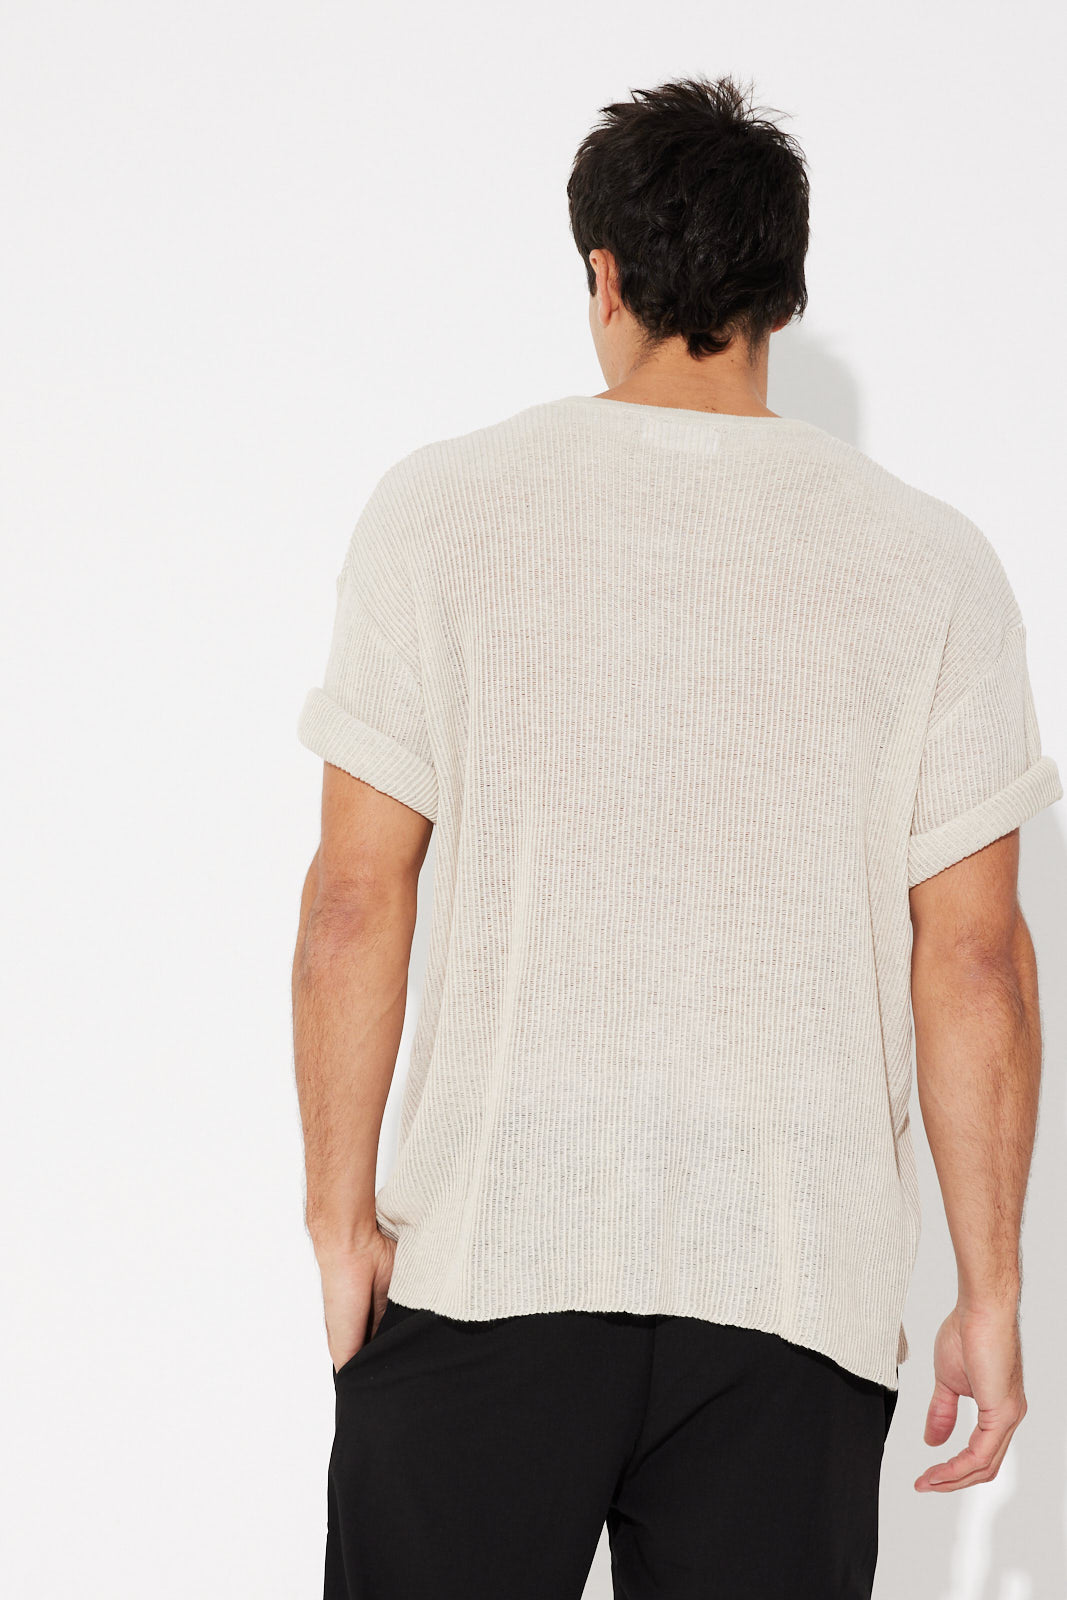 NTH Knitted Crew Tee Oat - FINAL SALE